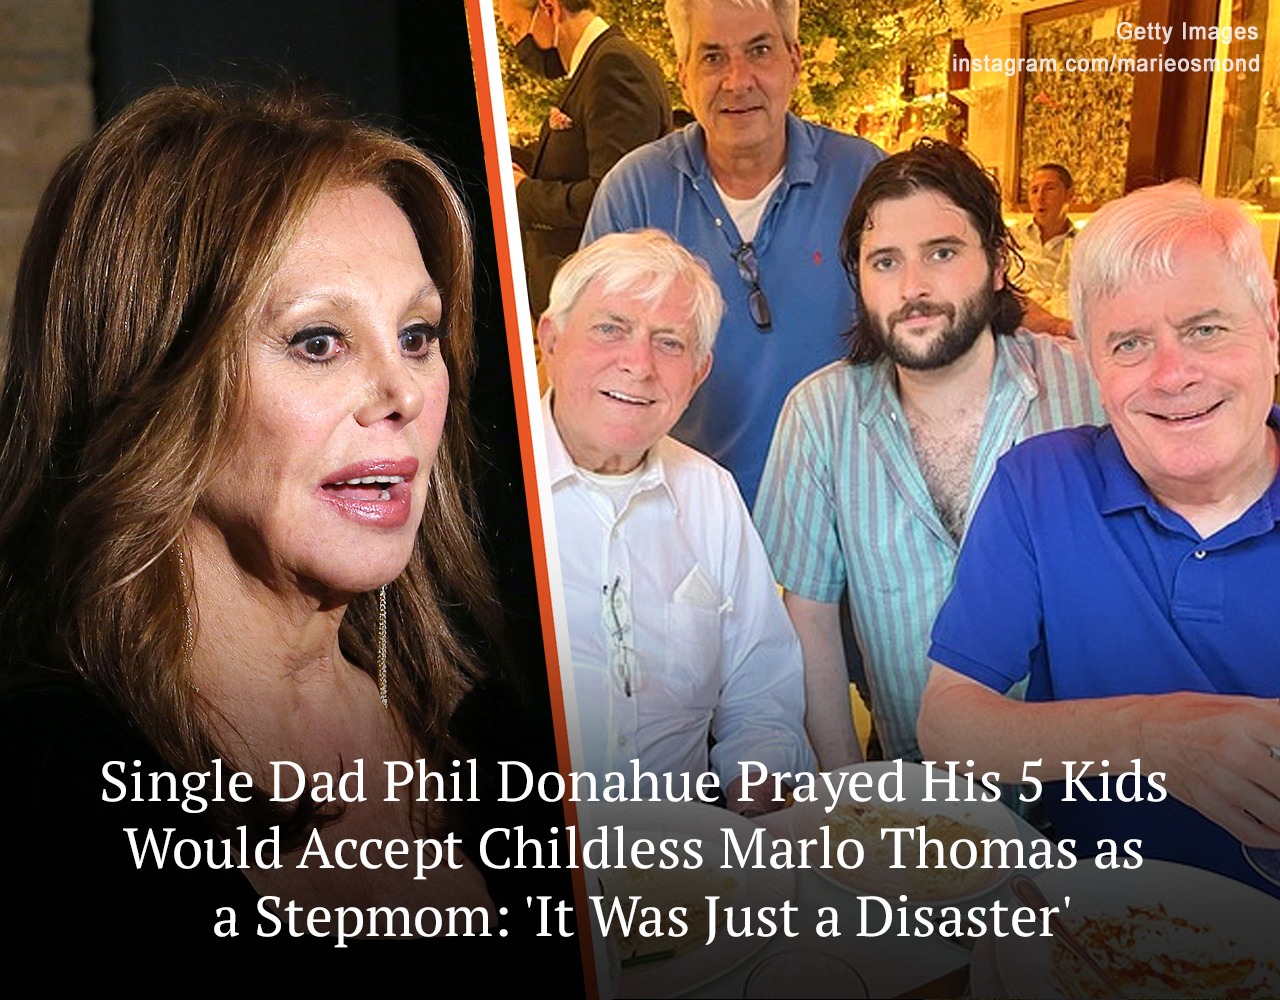 Single Dad Phil Donahue Prayed 5 Kids Would Accept Childless Marlo ...